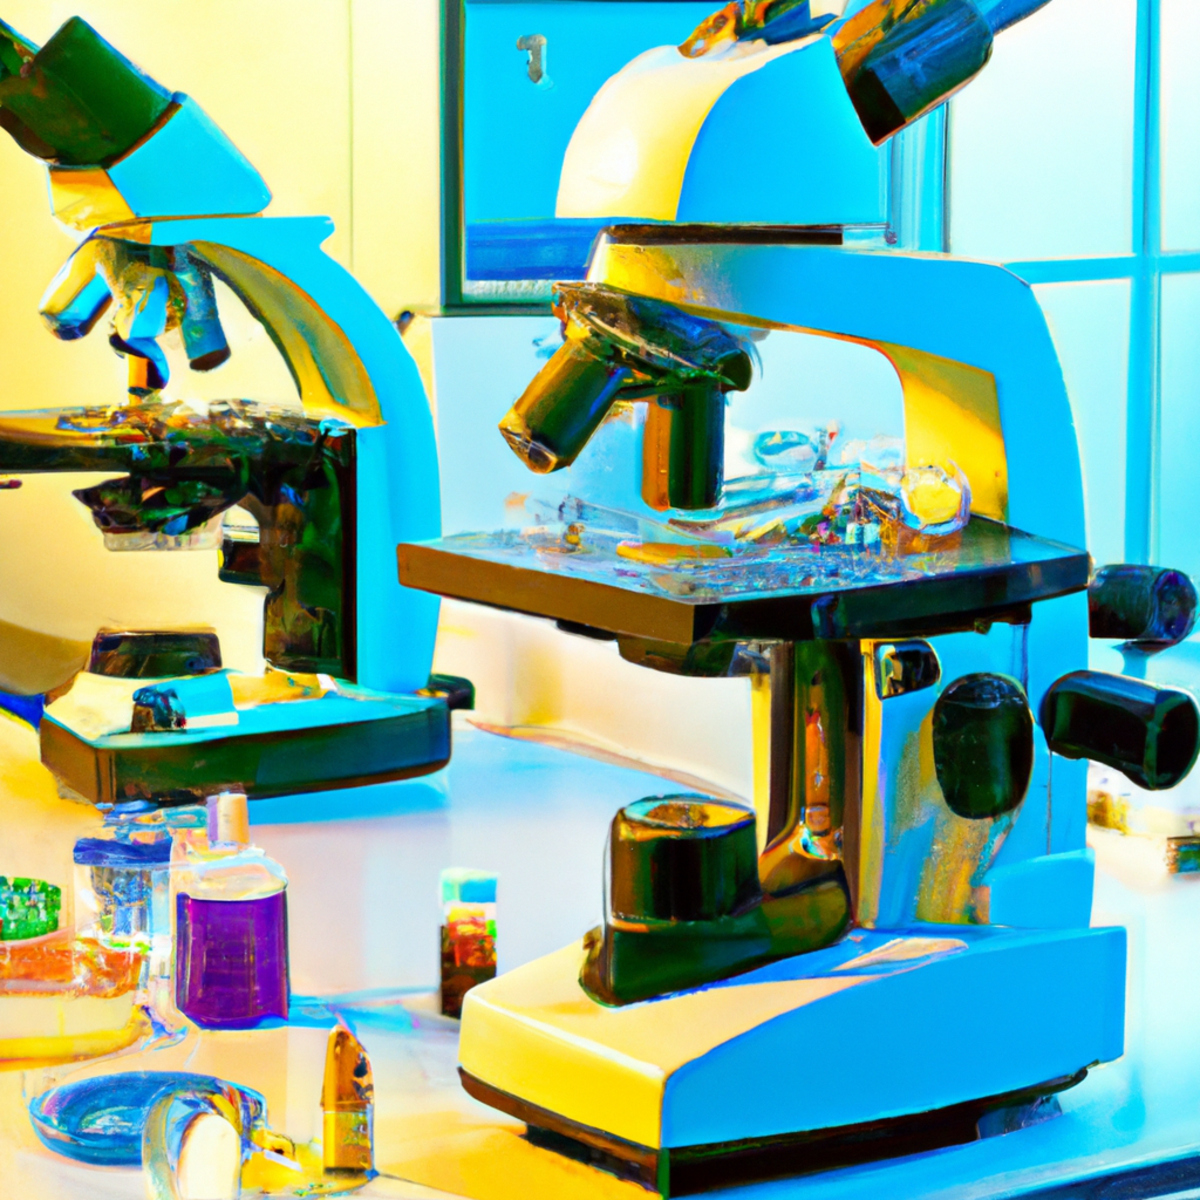 Medical laboratory with scientific equipment and tools, emphasizing meticulous diagnostic process and expertise.